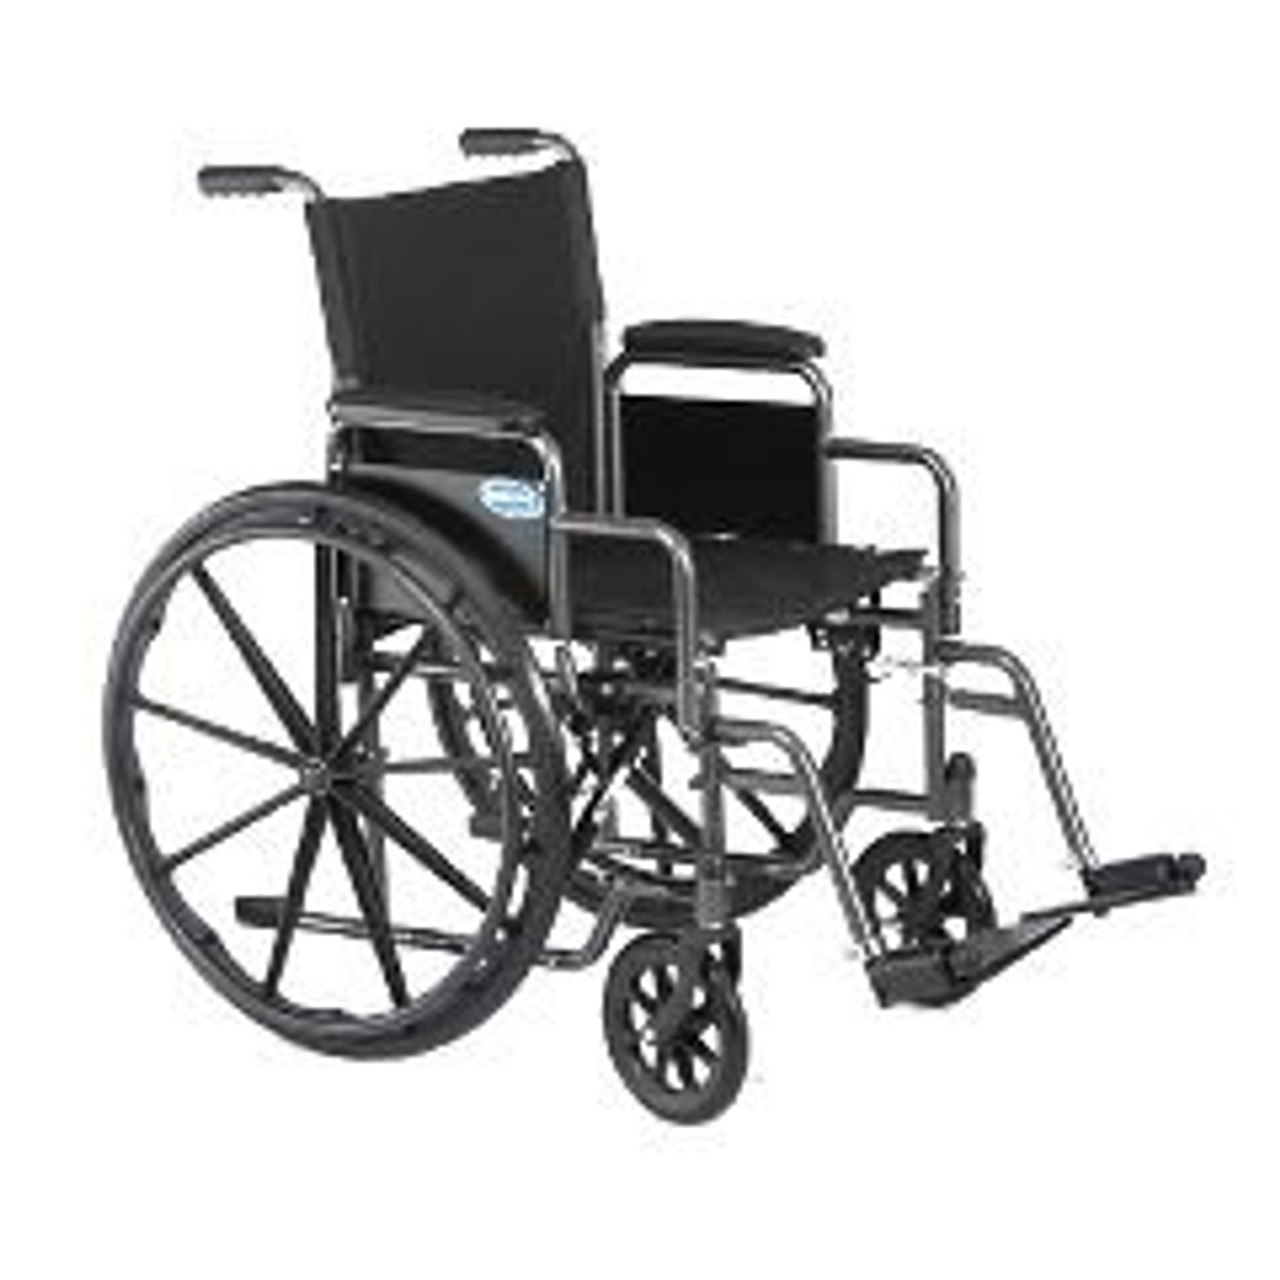 Tuffy TUF001 wheelchair 18" standard, fixed arms, removable footrests (TUF001) (Tuffy TUF001)